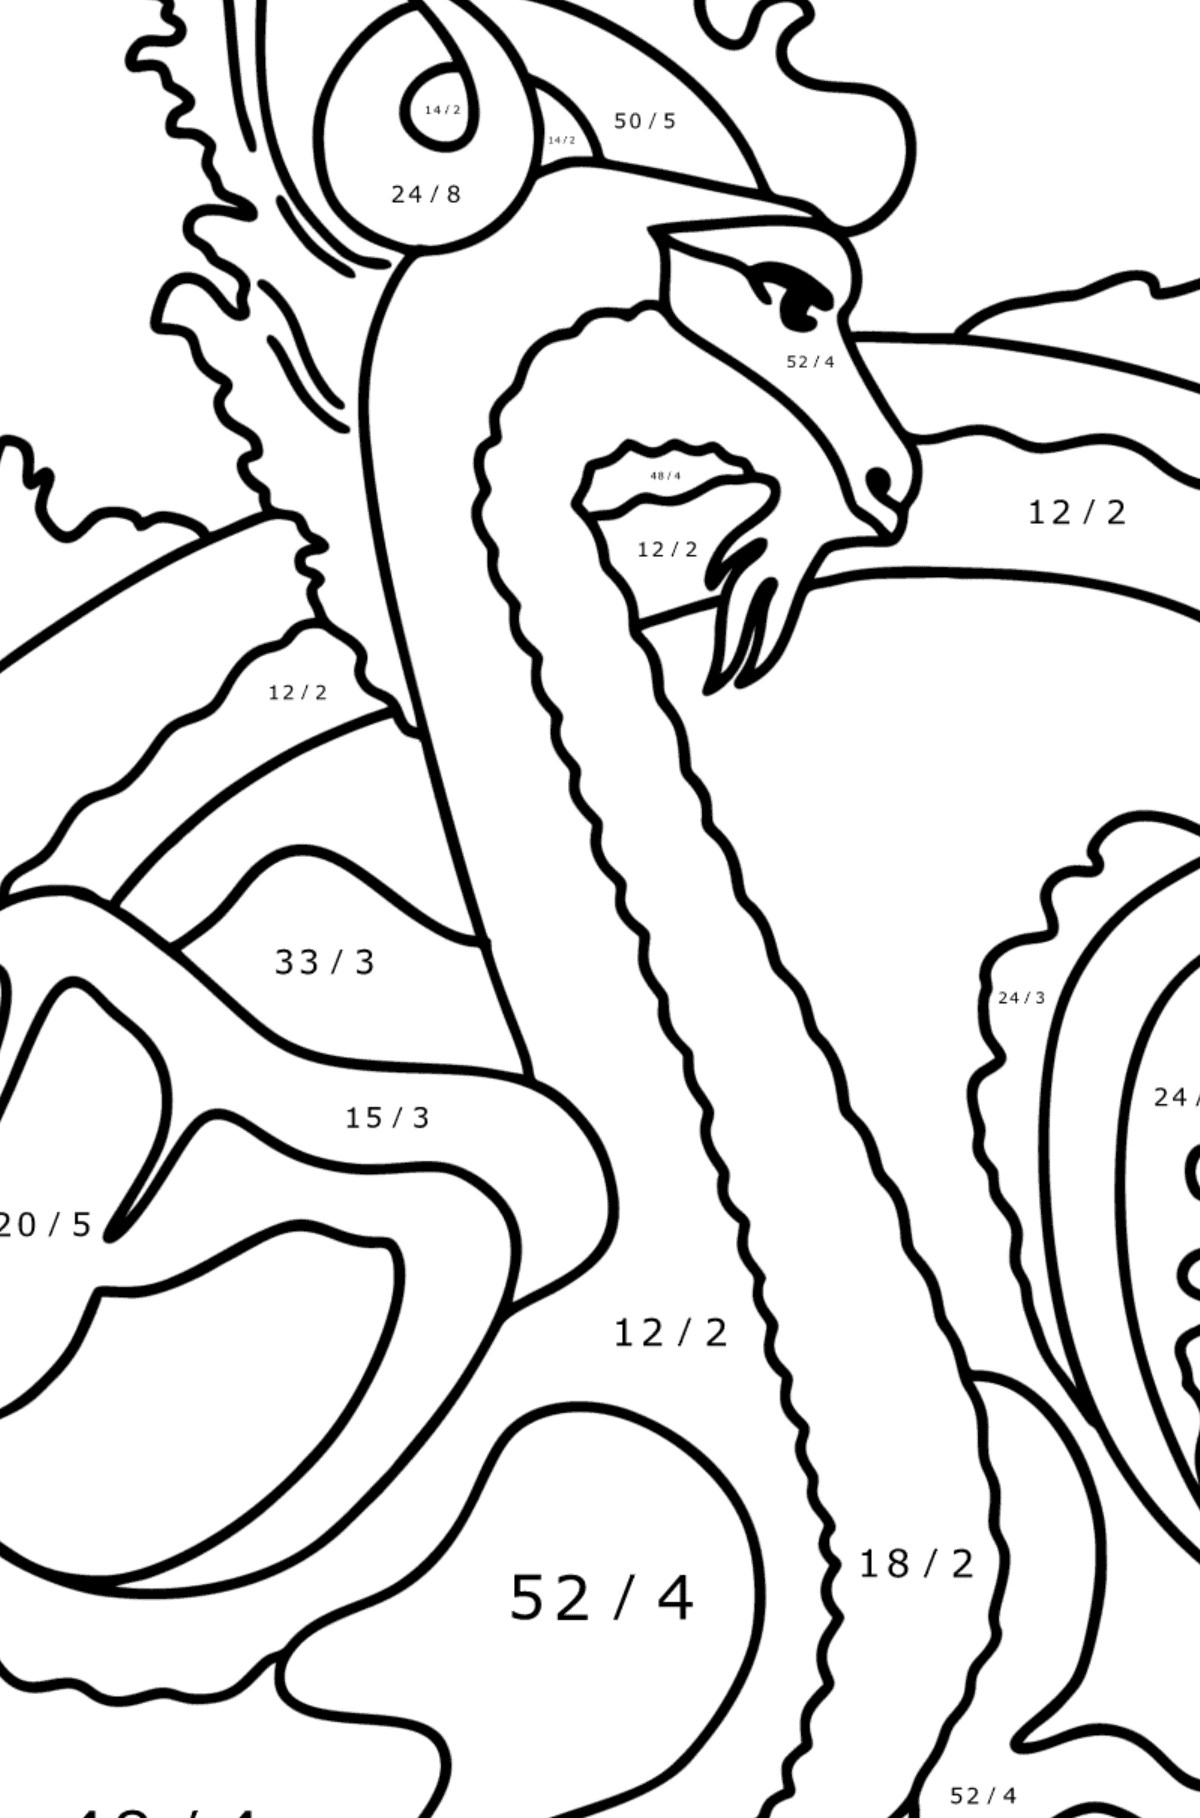 Mythical Dragon coloring page - Math Coloring - Division for Kids